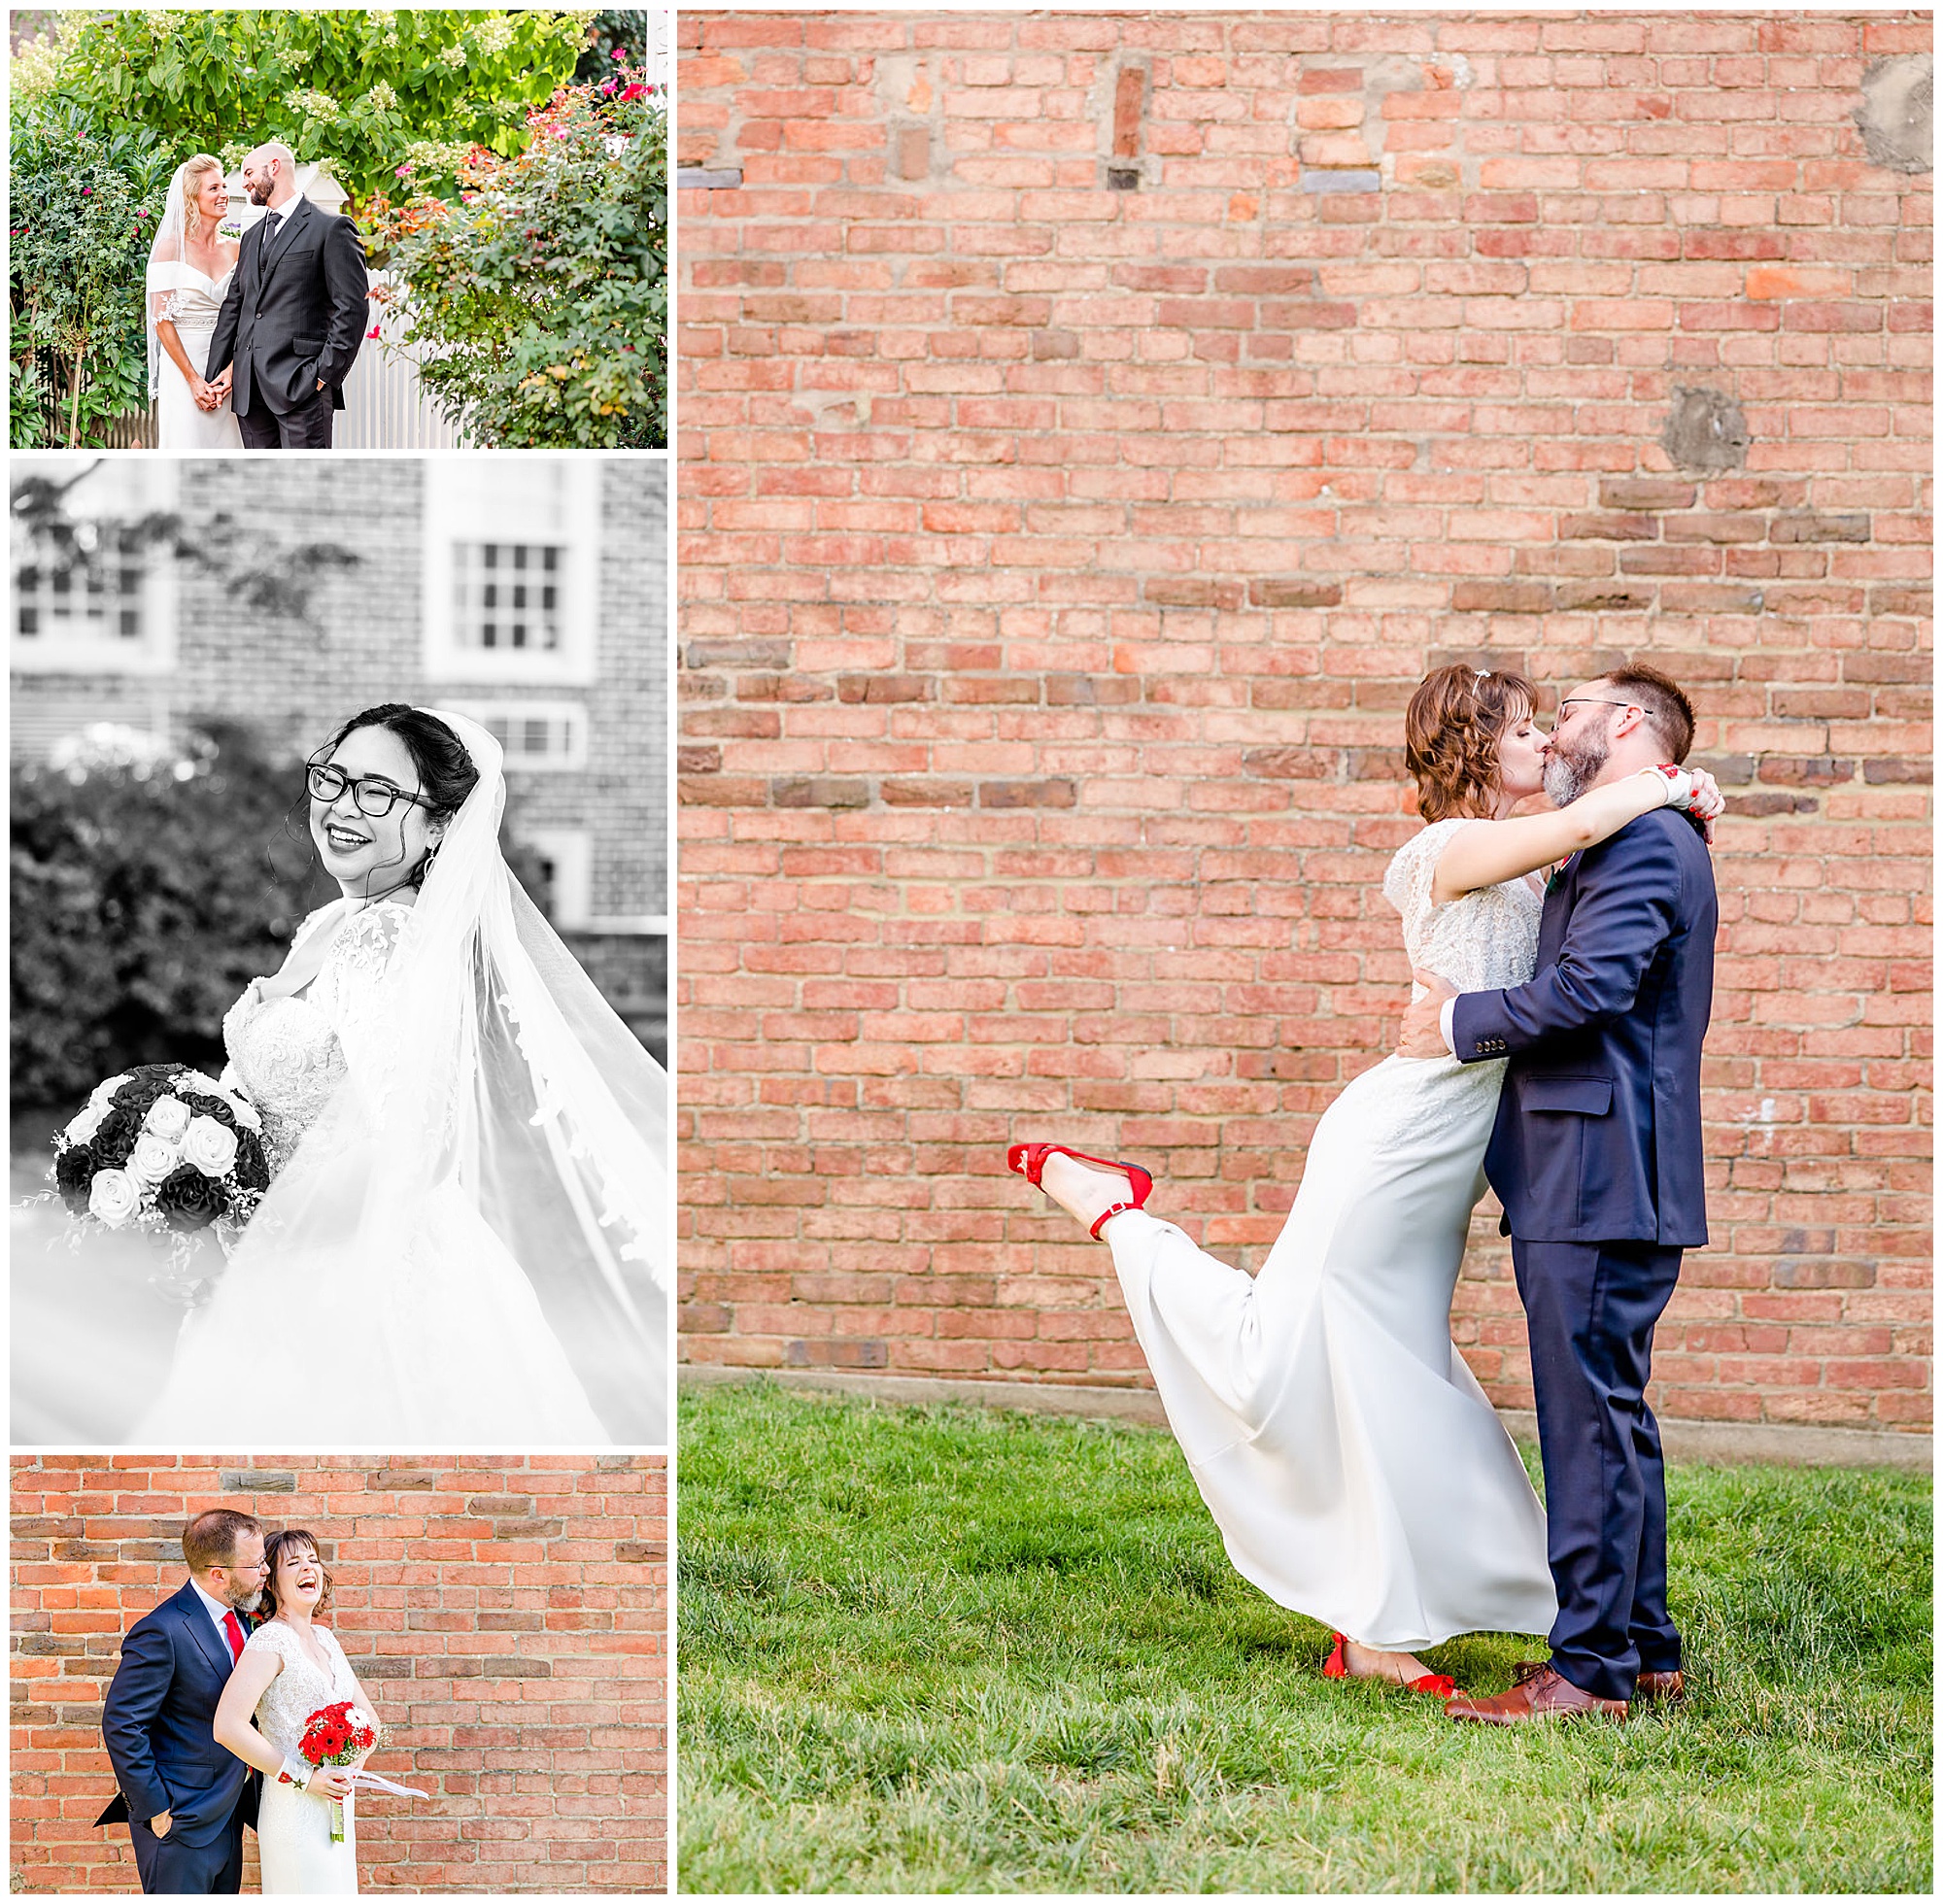 best of 2022 elopements and micro-weddings, best of weddings, best of 2022, DC wedding photographer, DC micro-wedding photographer, DC elopement photographer, Alexandria elopement photographer, Old Town elopement photographer, Rachel E.H. Photography, couple kissing, brick wall, black and white, red wedding shoes, bride smiling